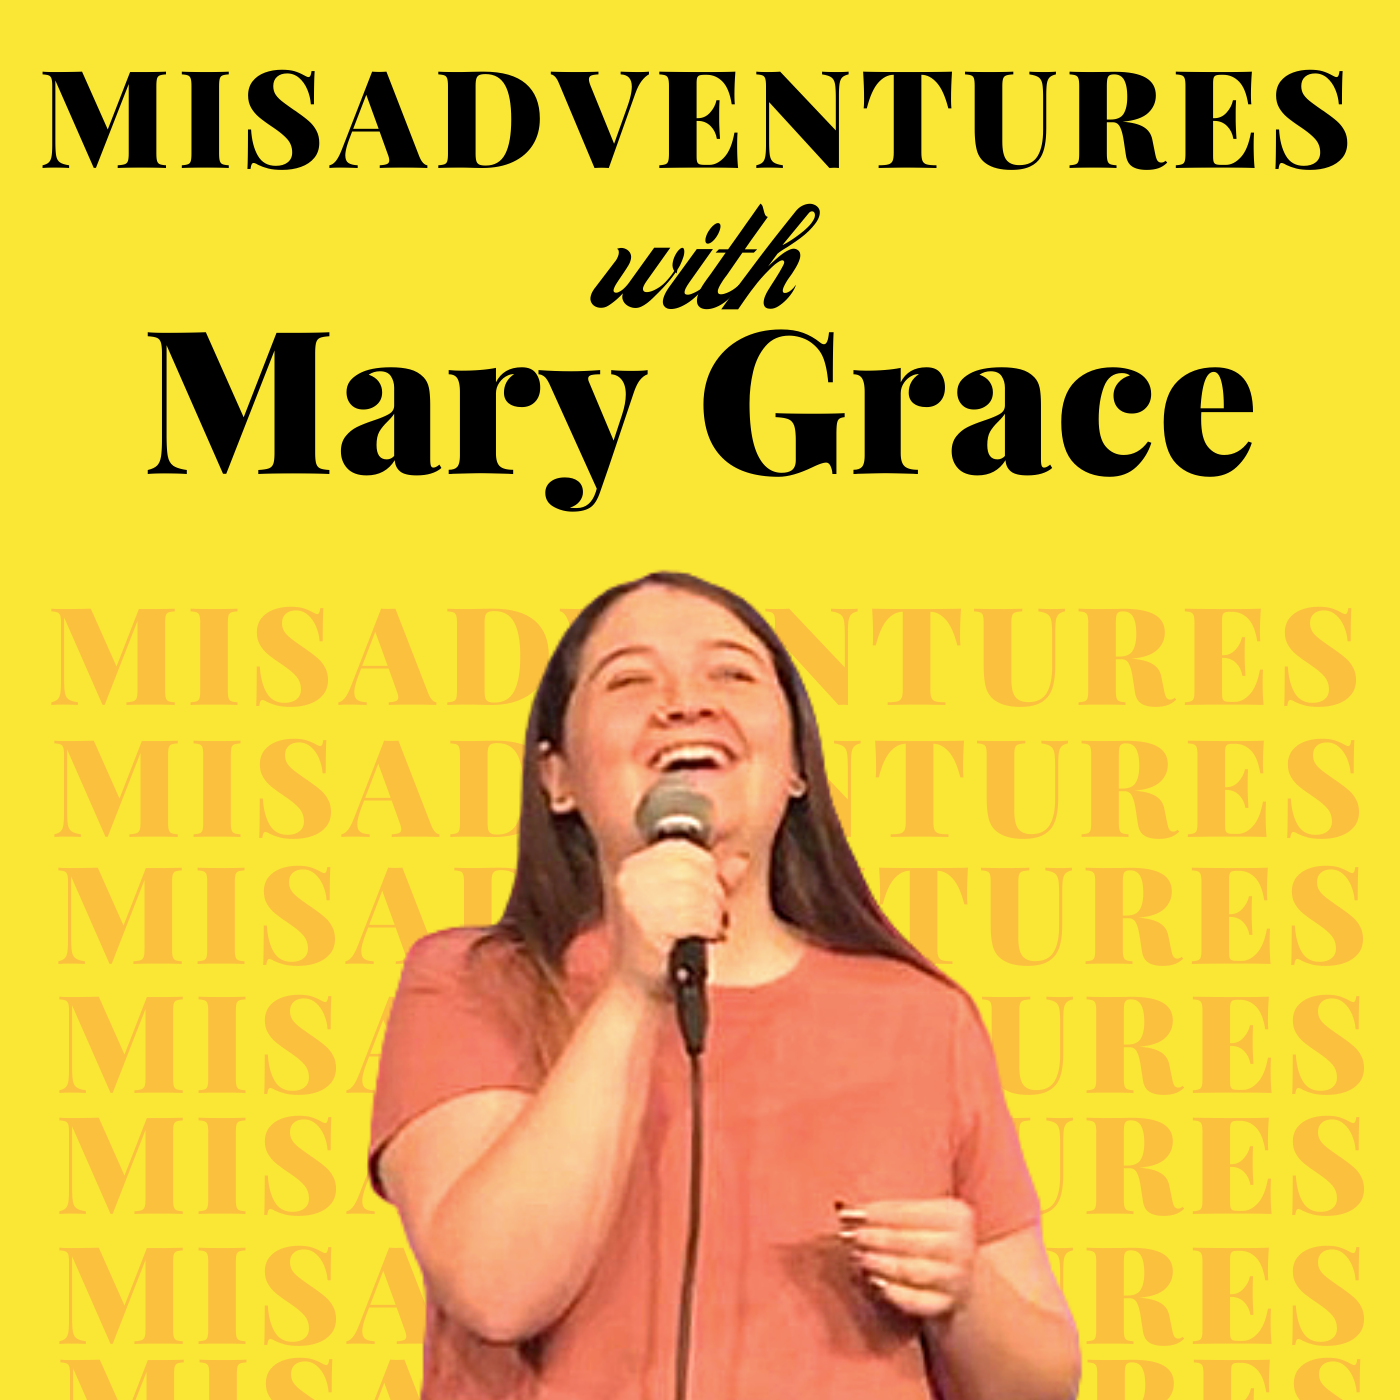 Misadventures with Mary Grace